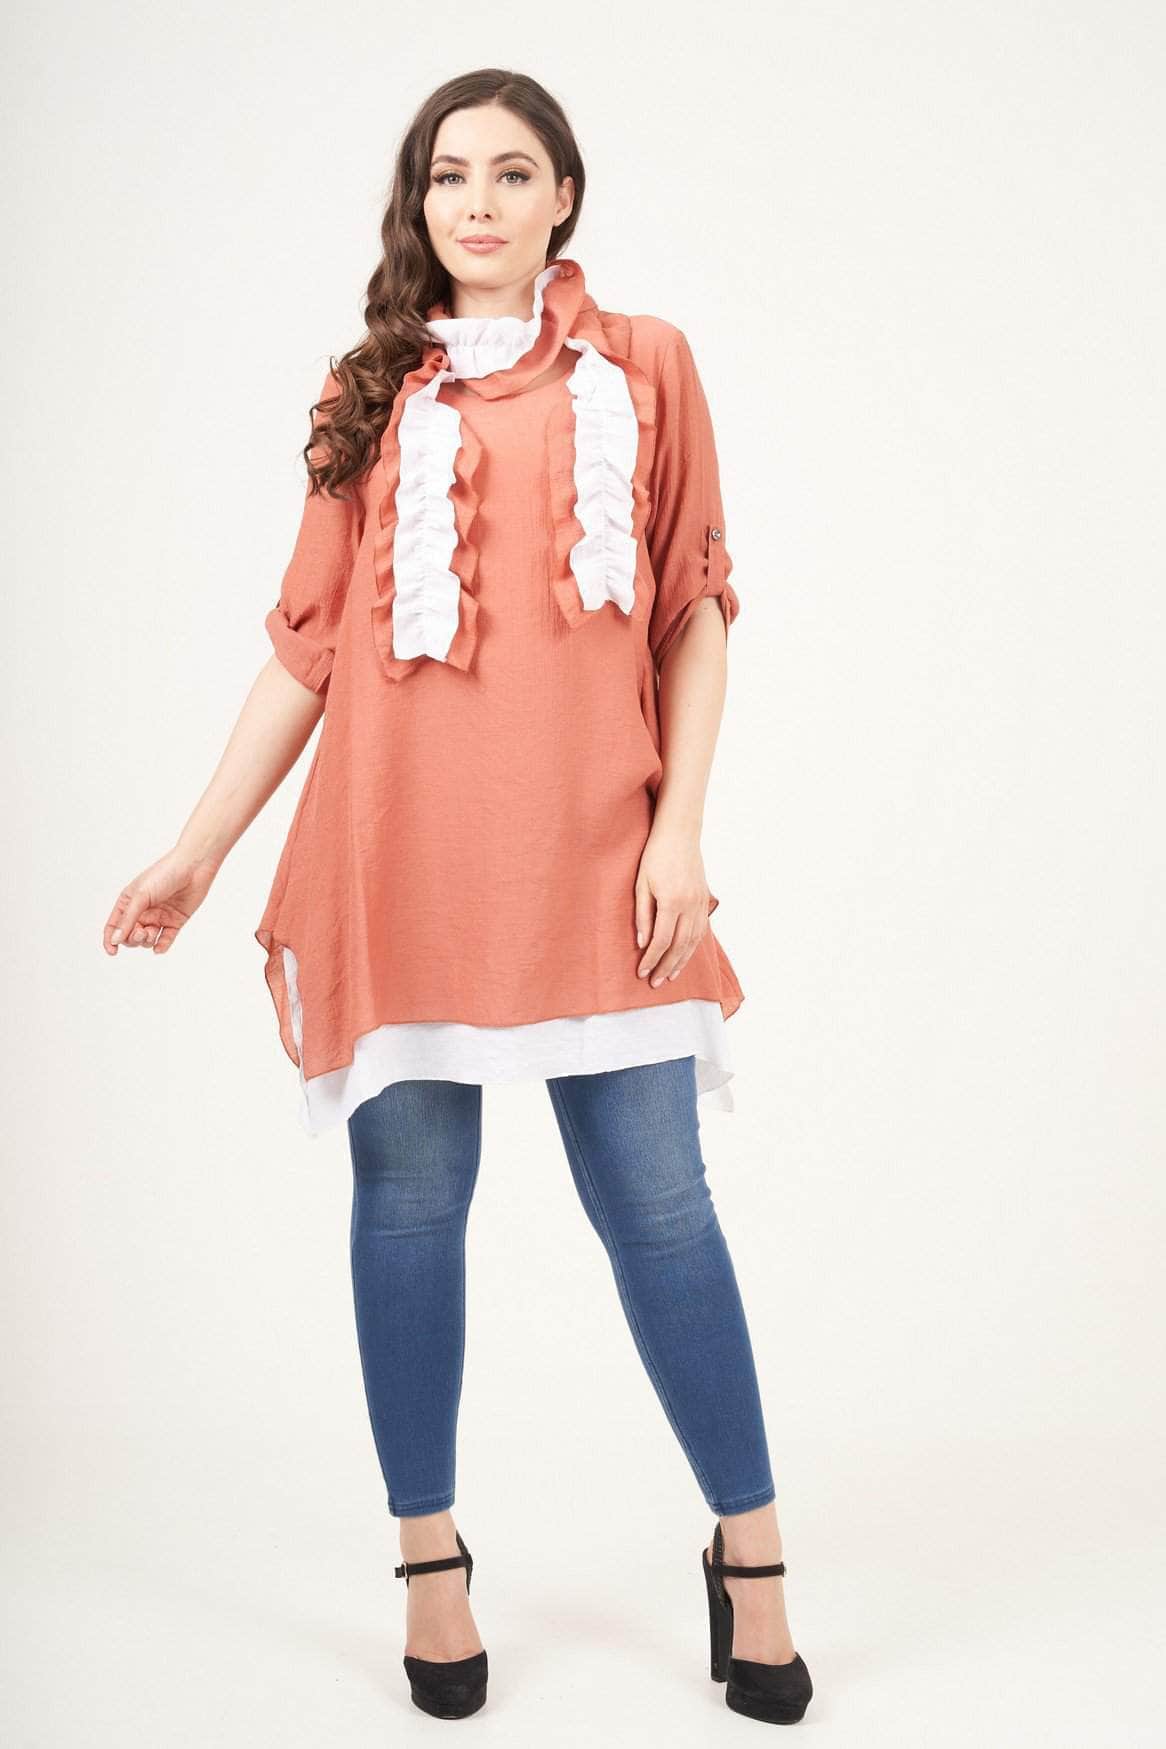 Saloos Tunic Raelynn Linen-Look Layered Tunic with Scarf